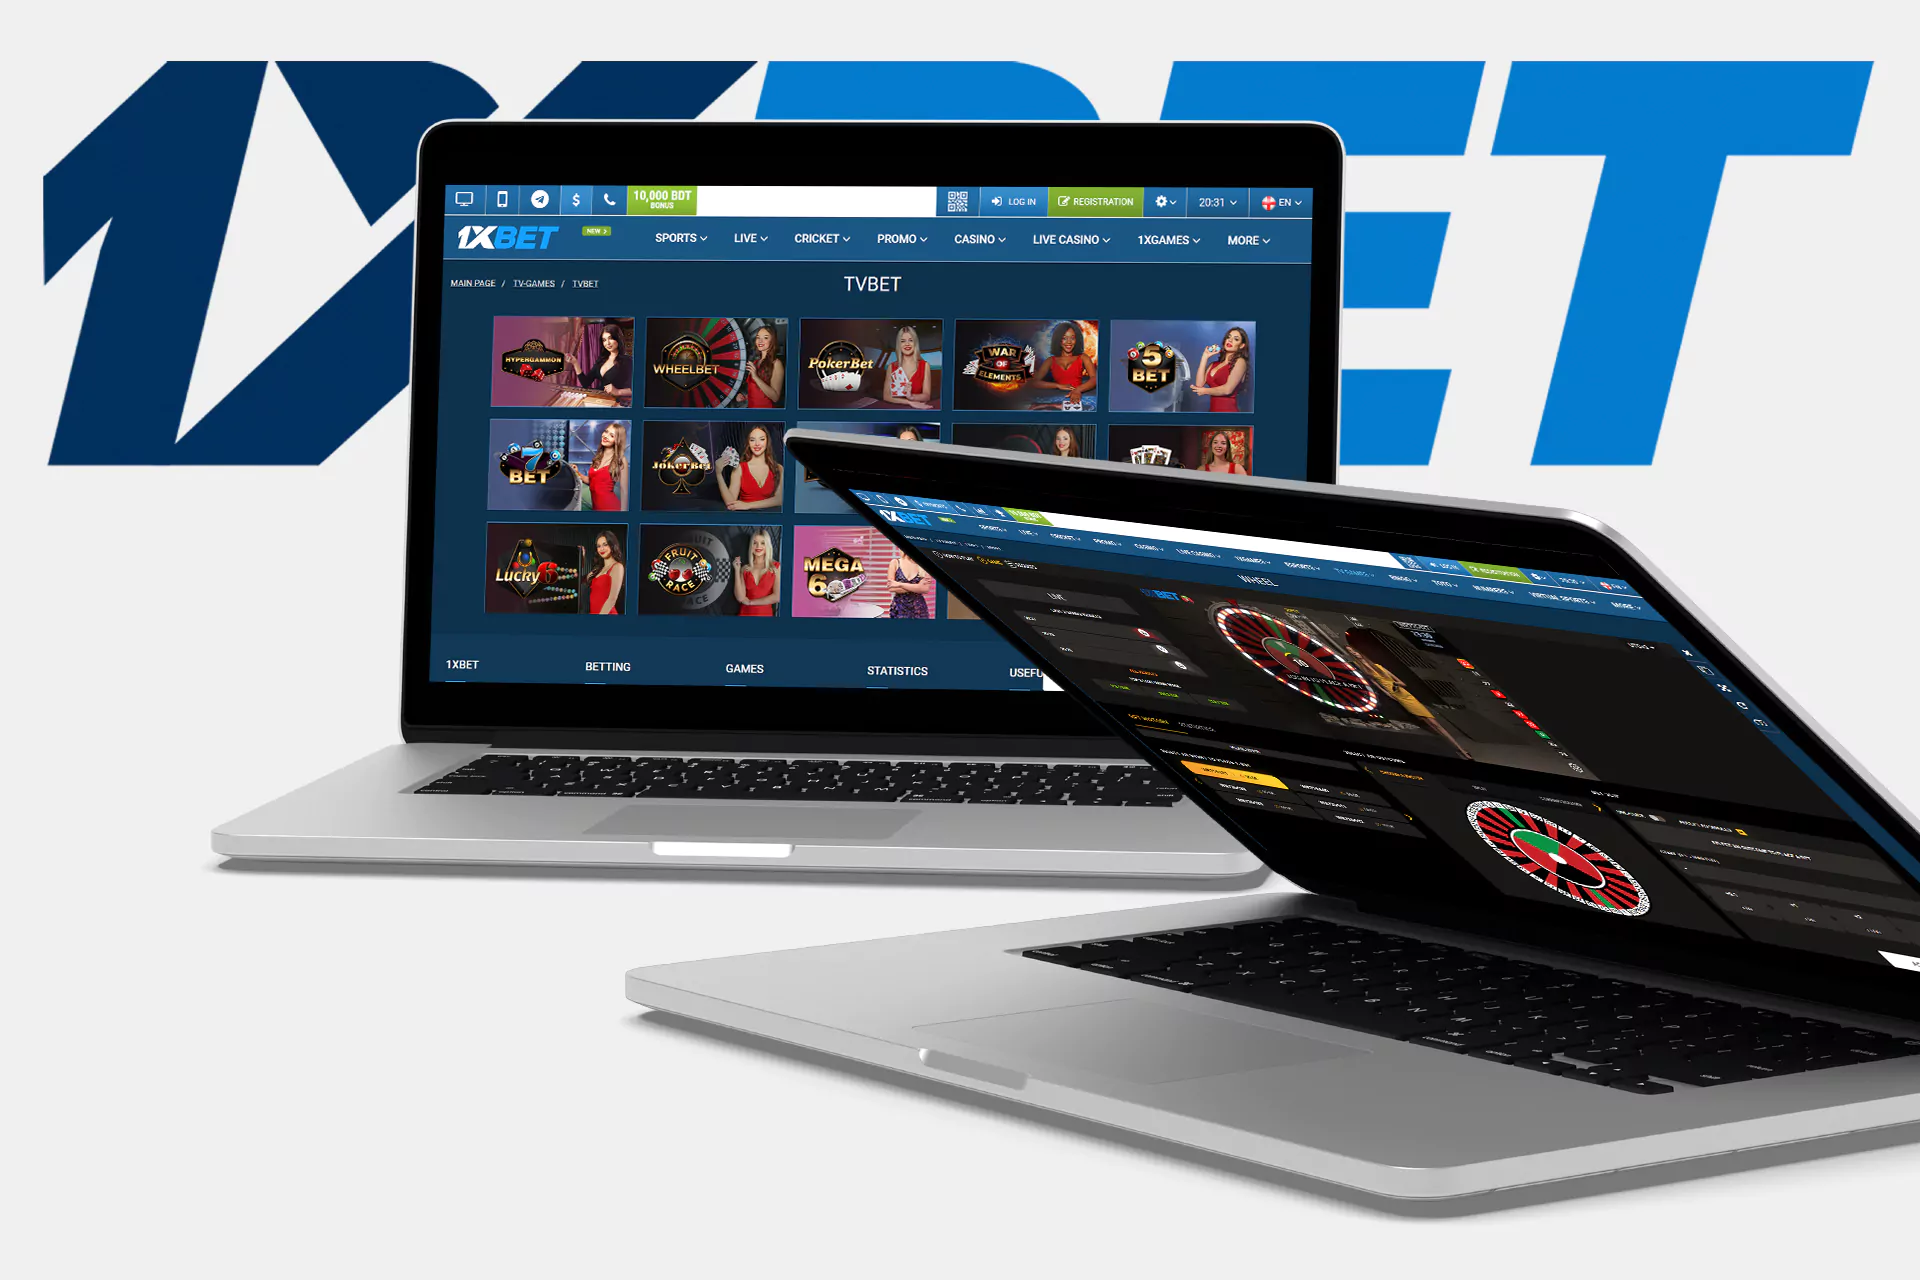 Play TVGAMES on the official website 1xBet in BD.